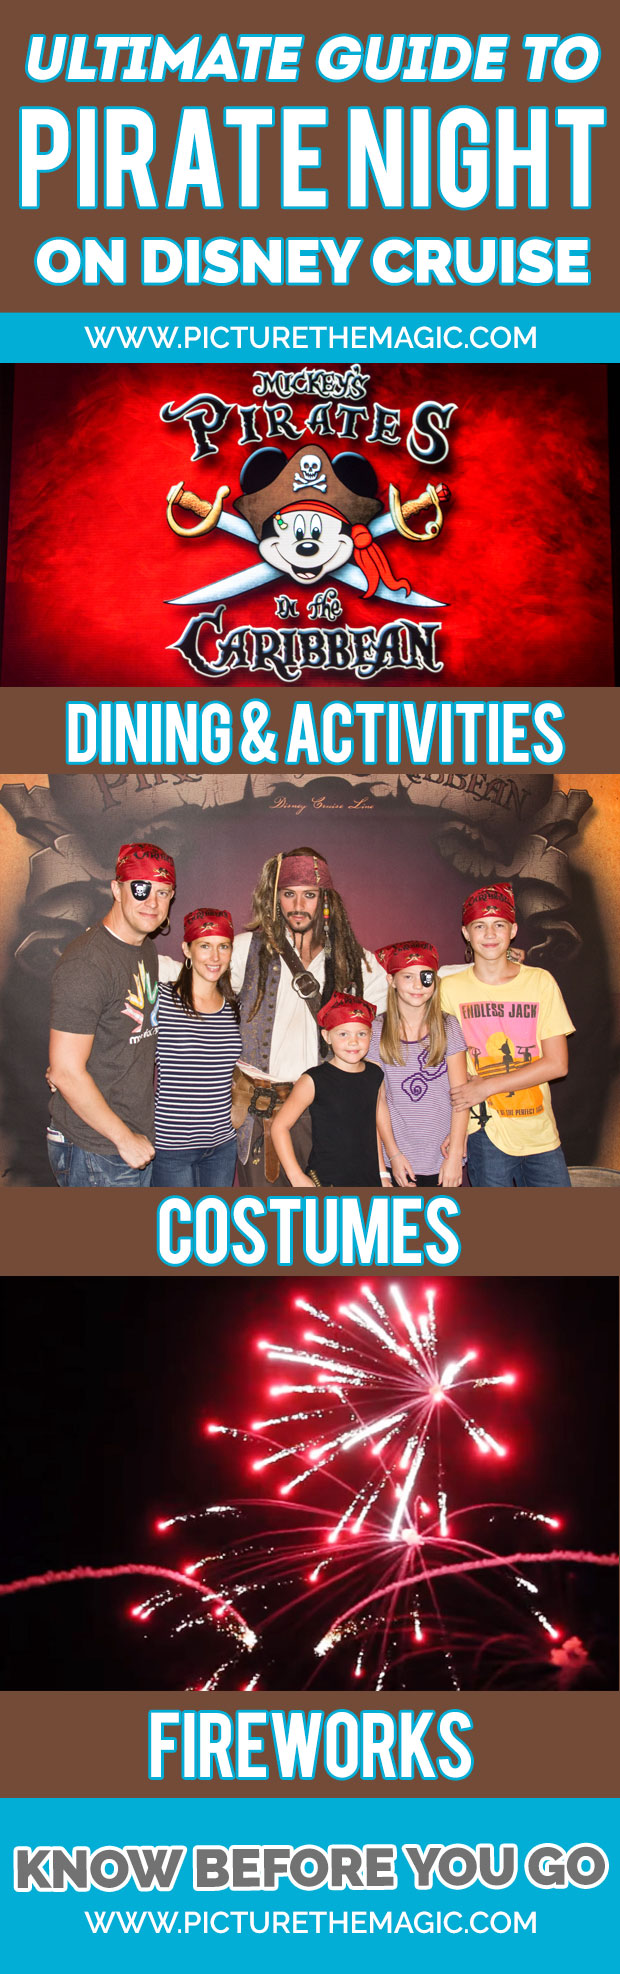 The Ultimate Guide to Disney Cruise Pirate Night!